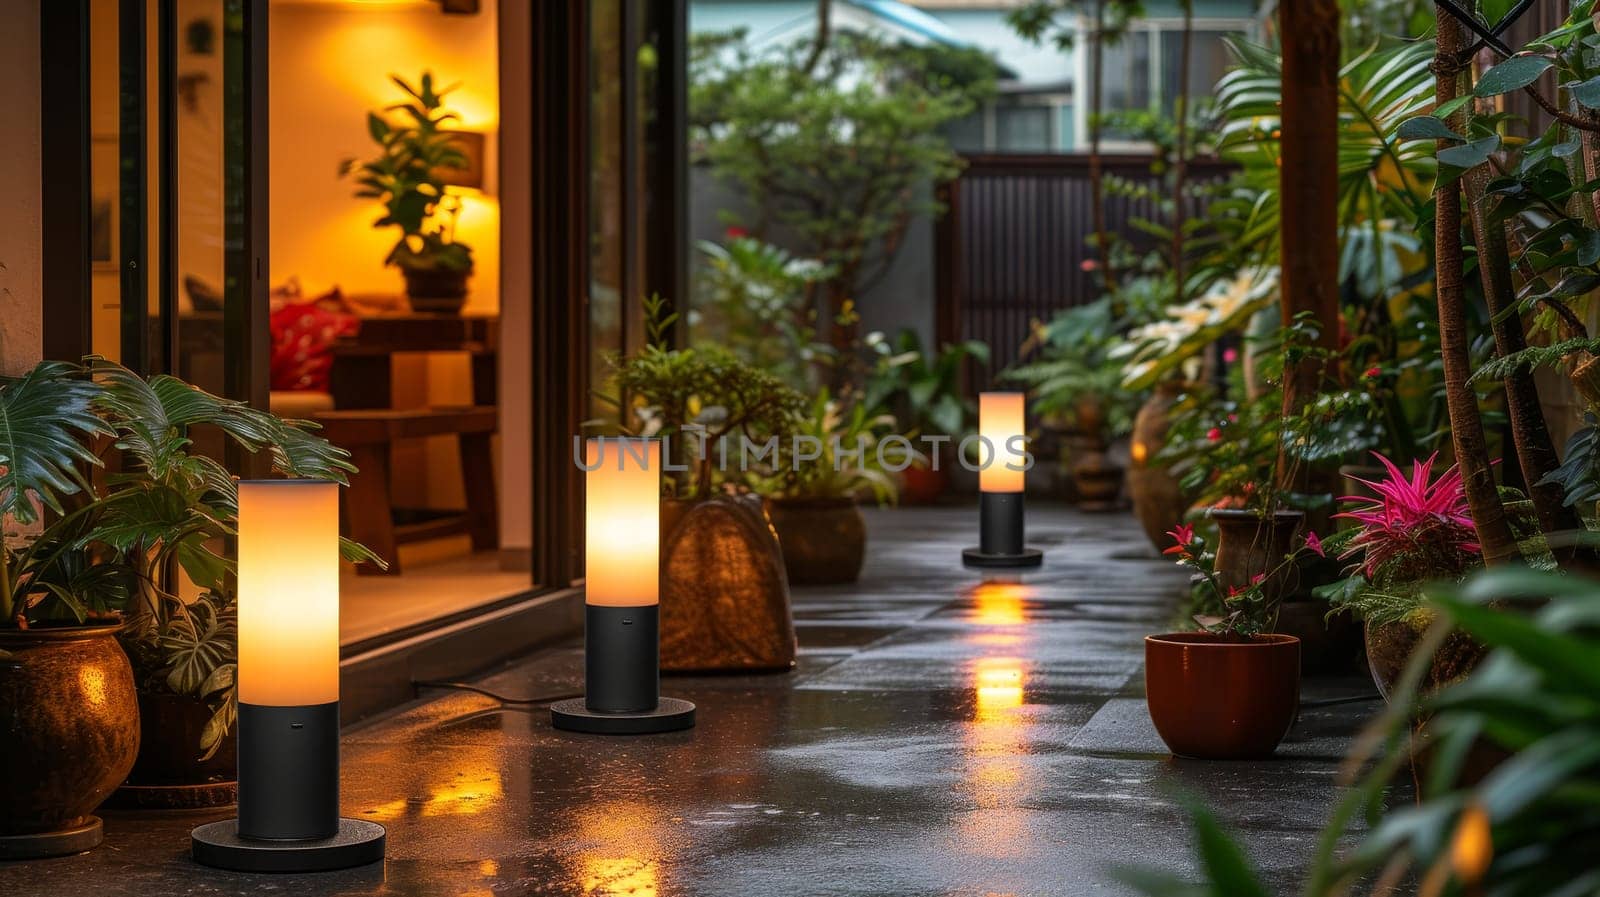 During the night, LED light posts illuminated a backyard garden. Outdoor lighting systems for backyards. by Andrei_01